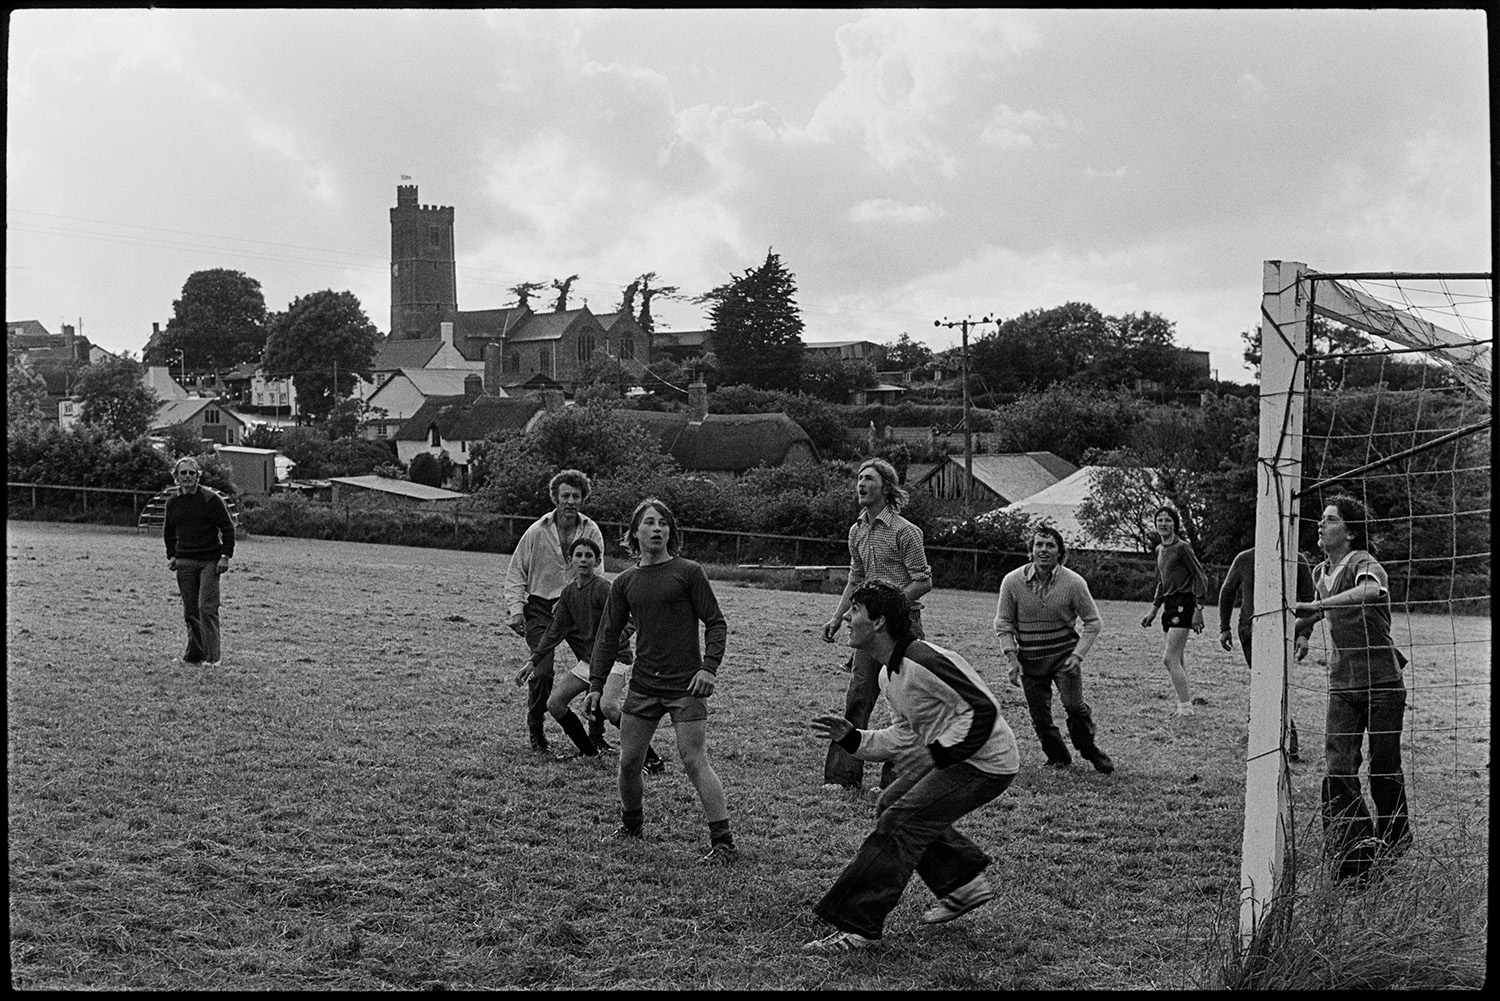 Jubilee football match.
[Young men playing football during the Silver Jubilee celebrations of Queen Elizabeth II in Atherington. Thatched cottages and Atherington church tower can be seen in the background.]